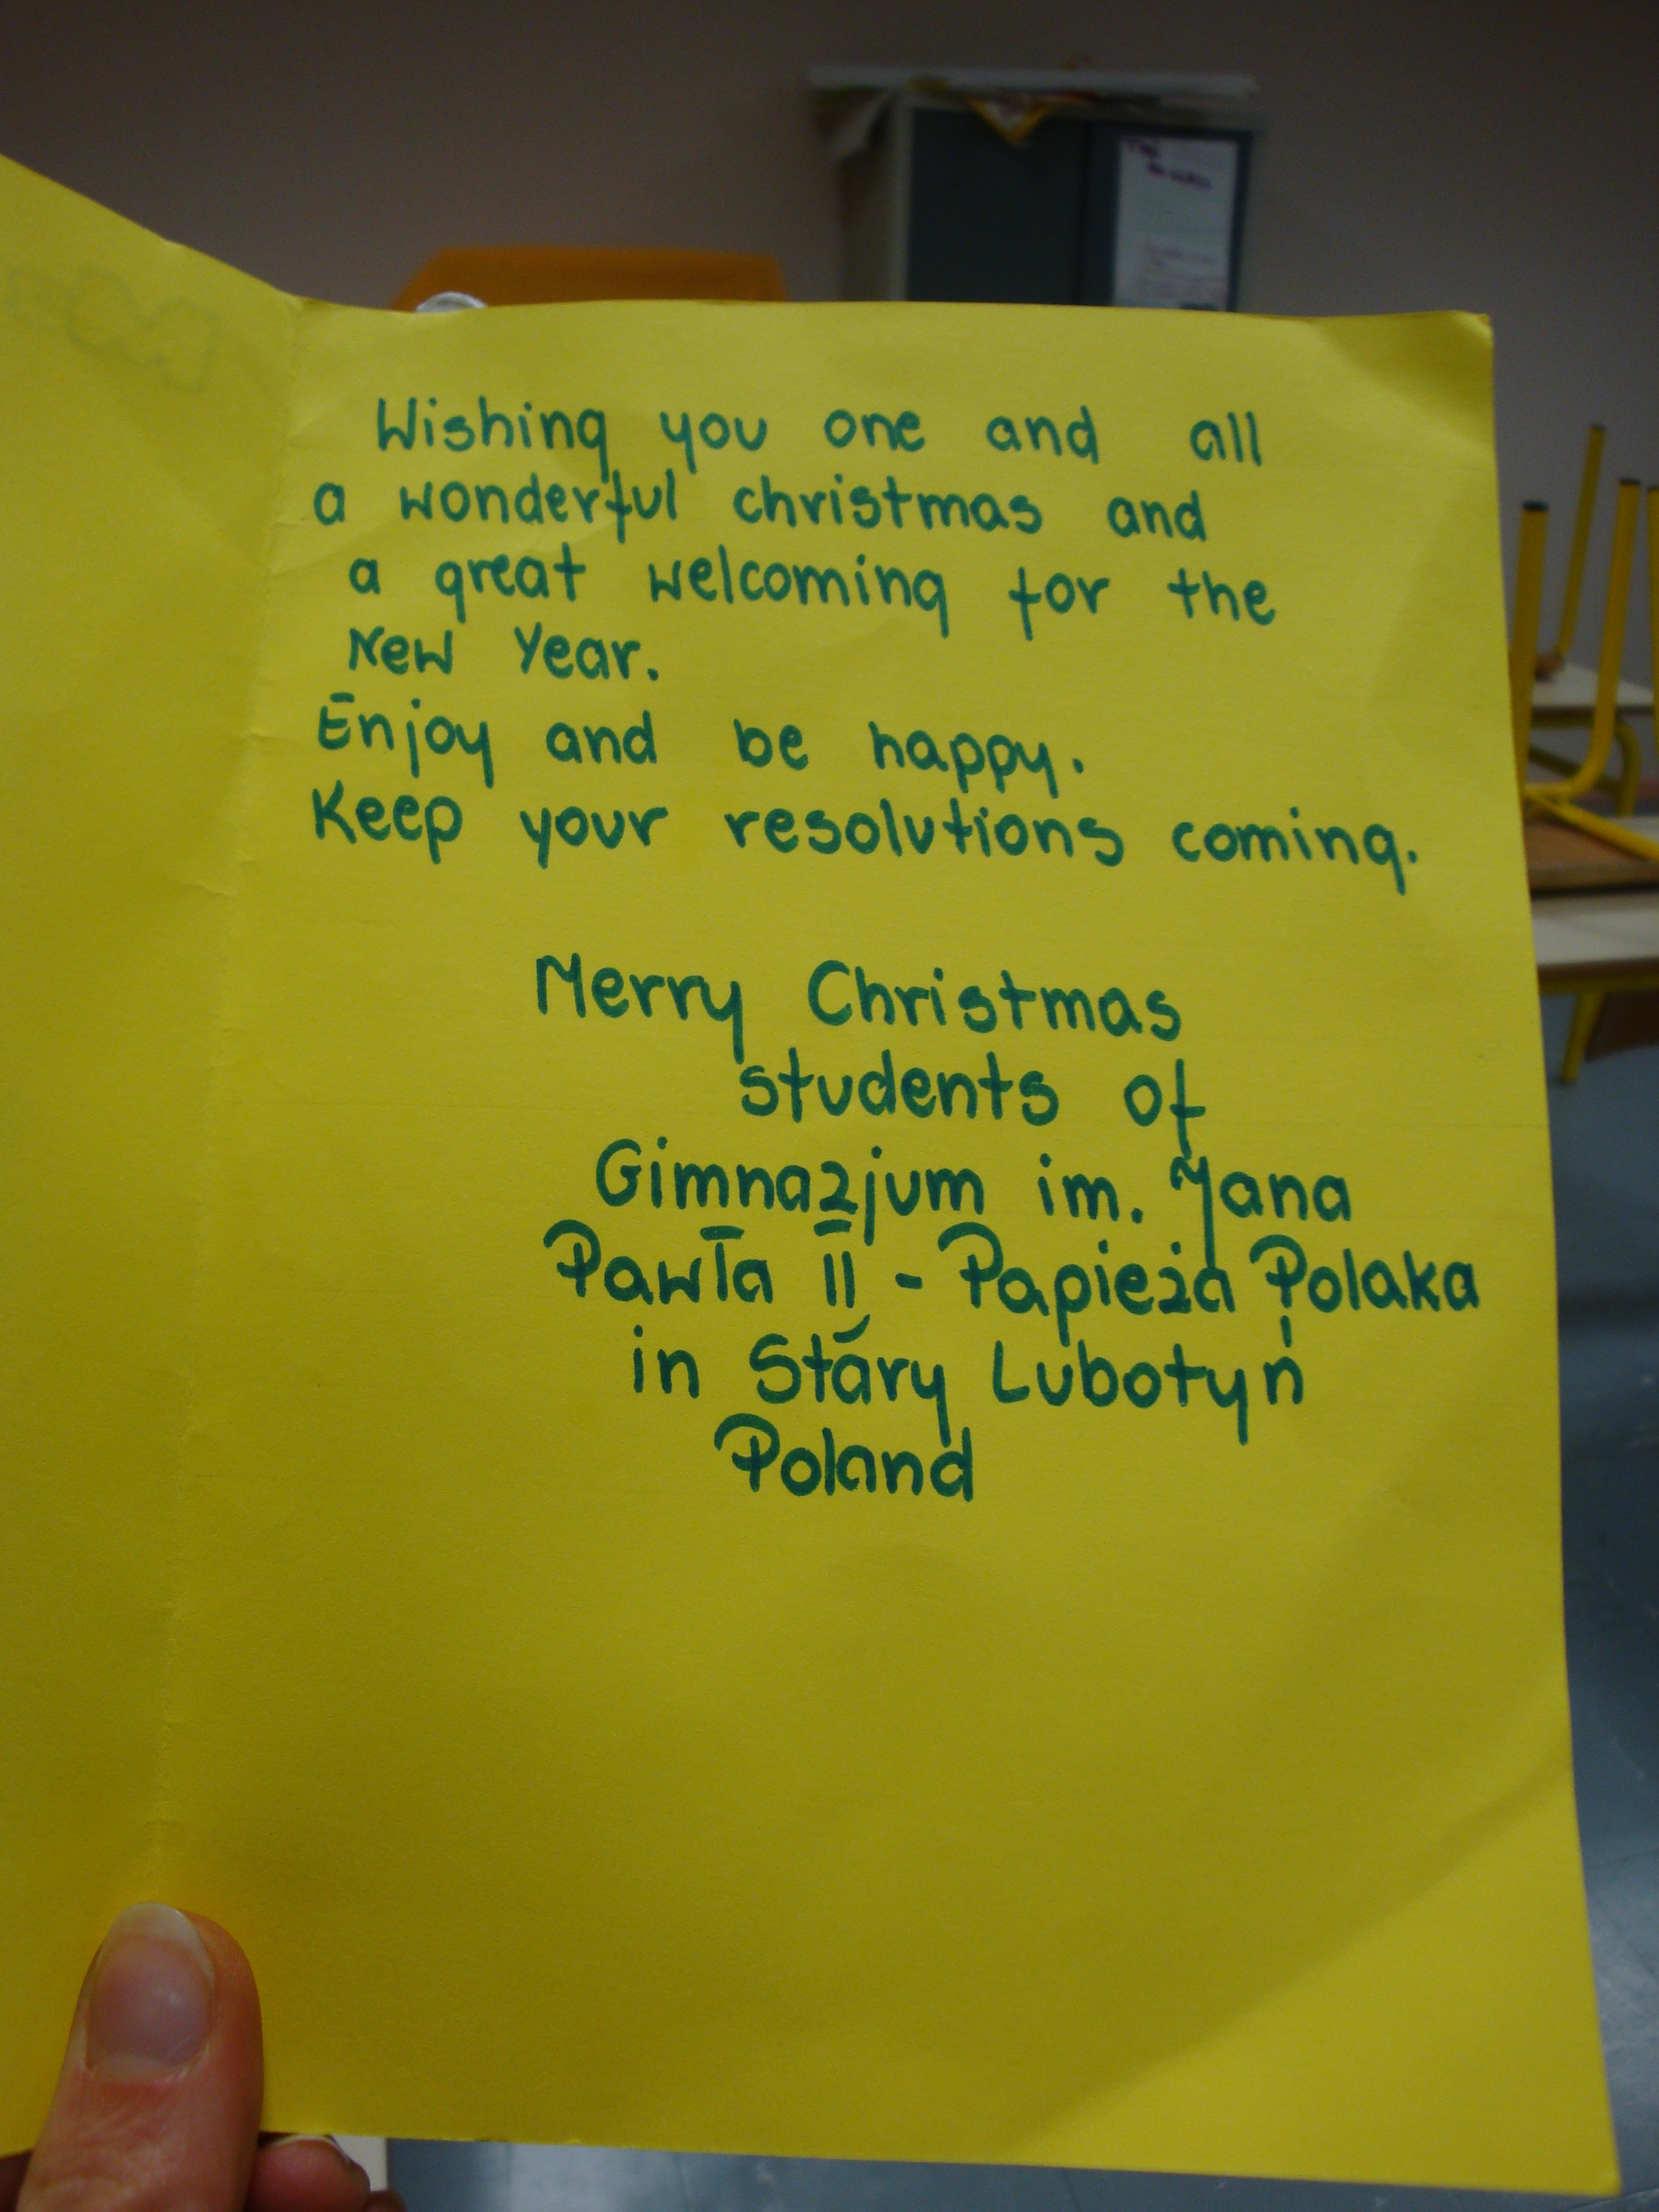 Look at the Christmas card we received from our Polish pen pals